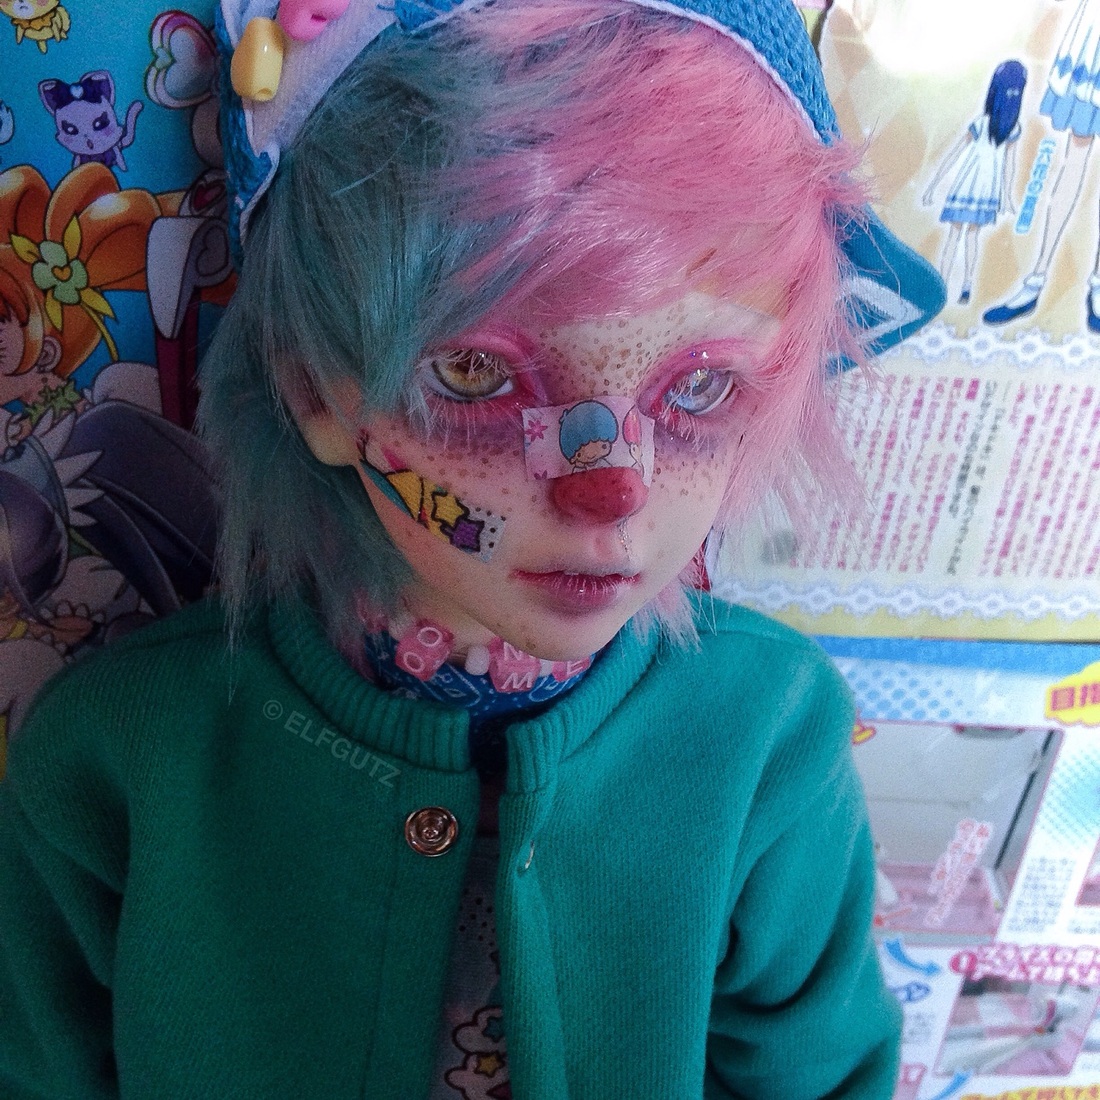 Pastel Goth looks a little worse for wear - Art doll Collection Online